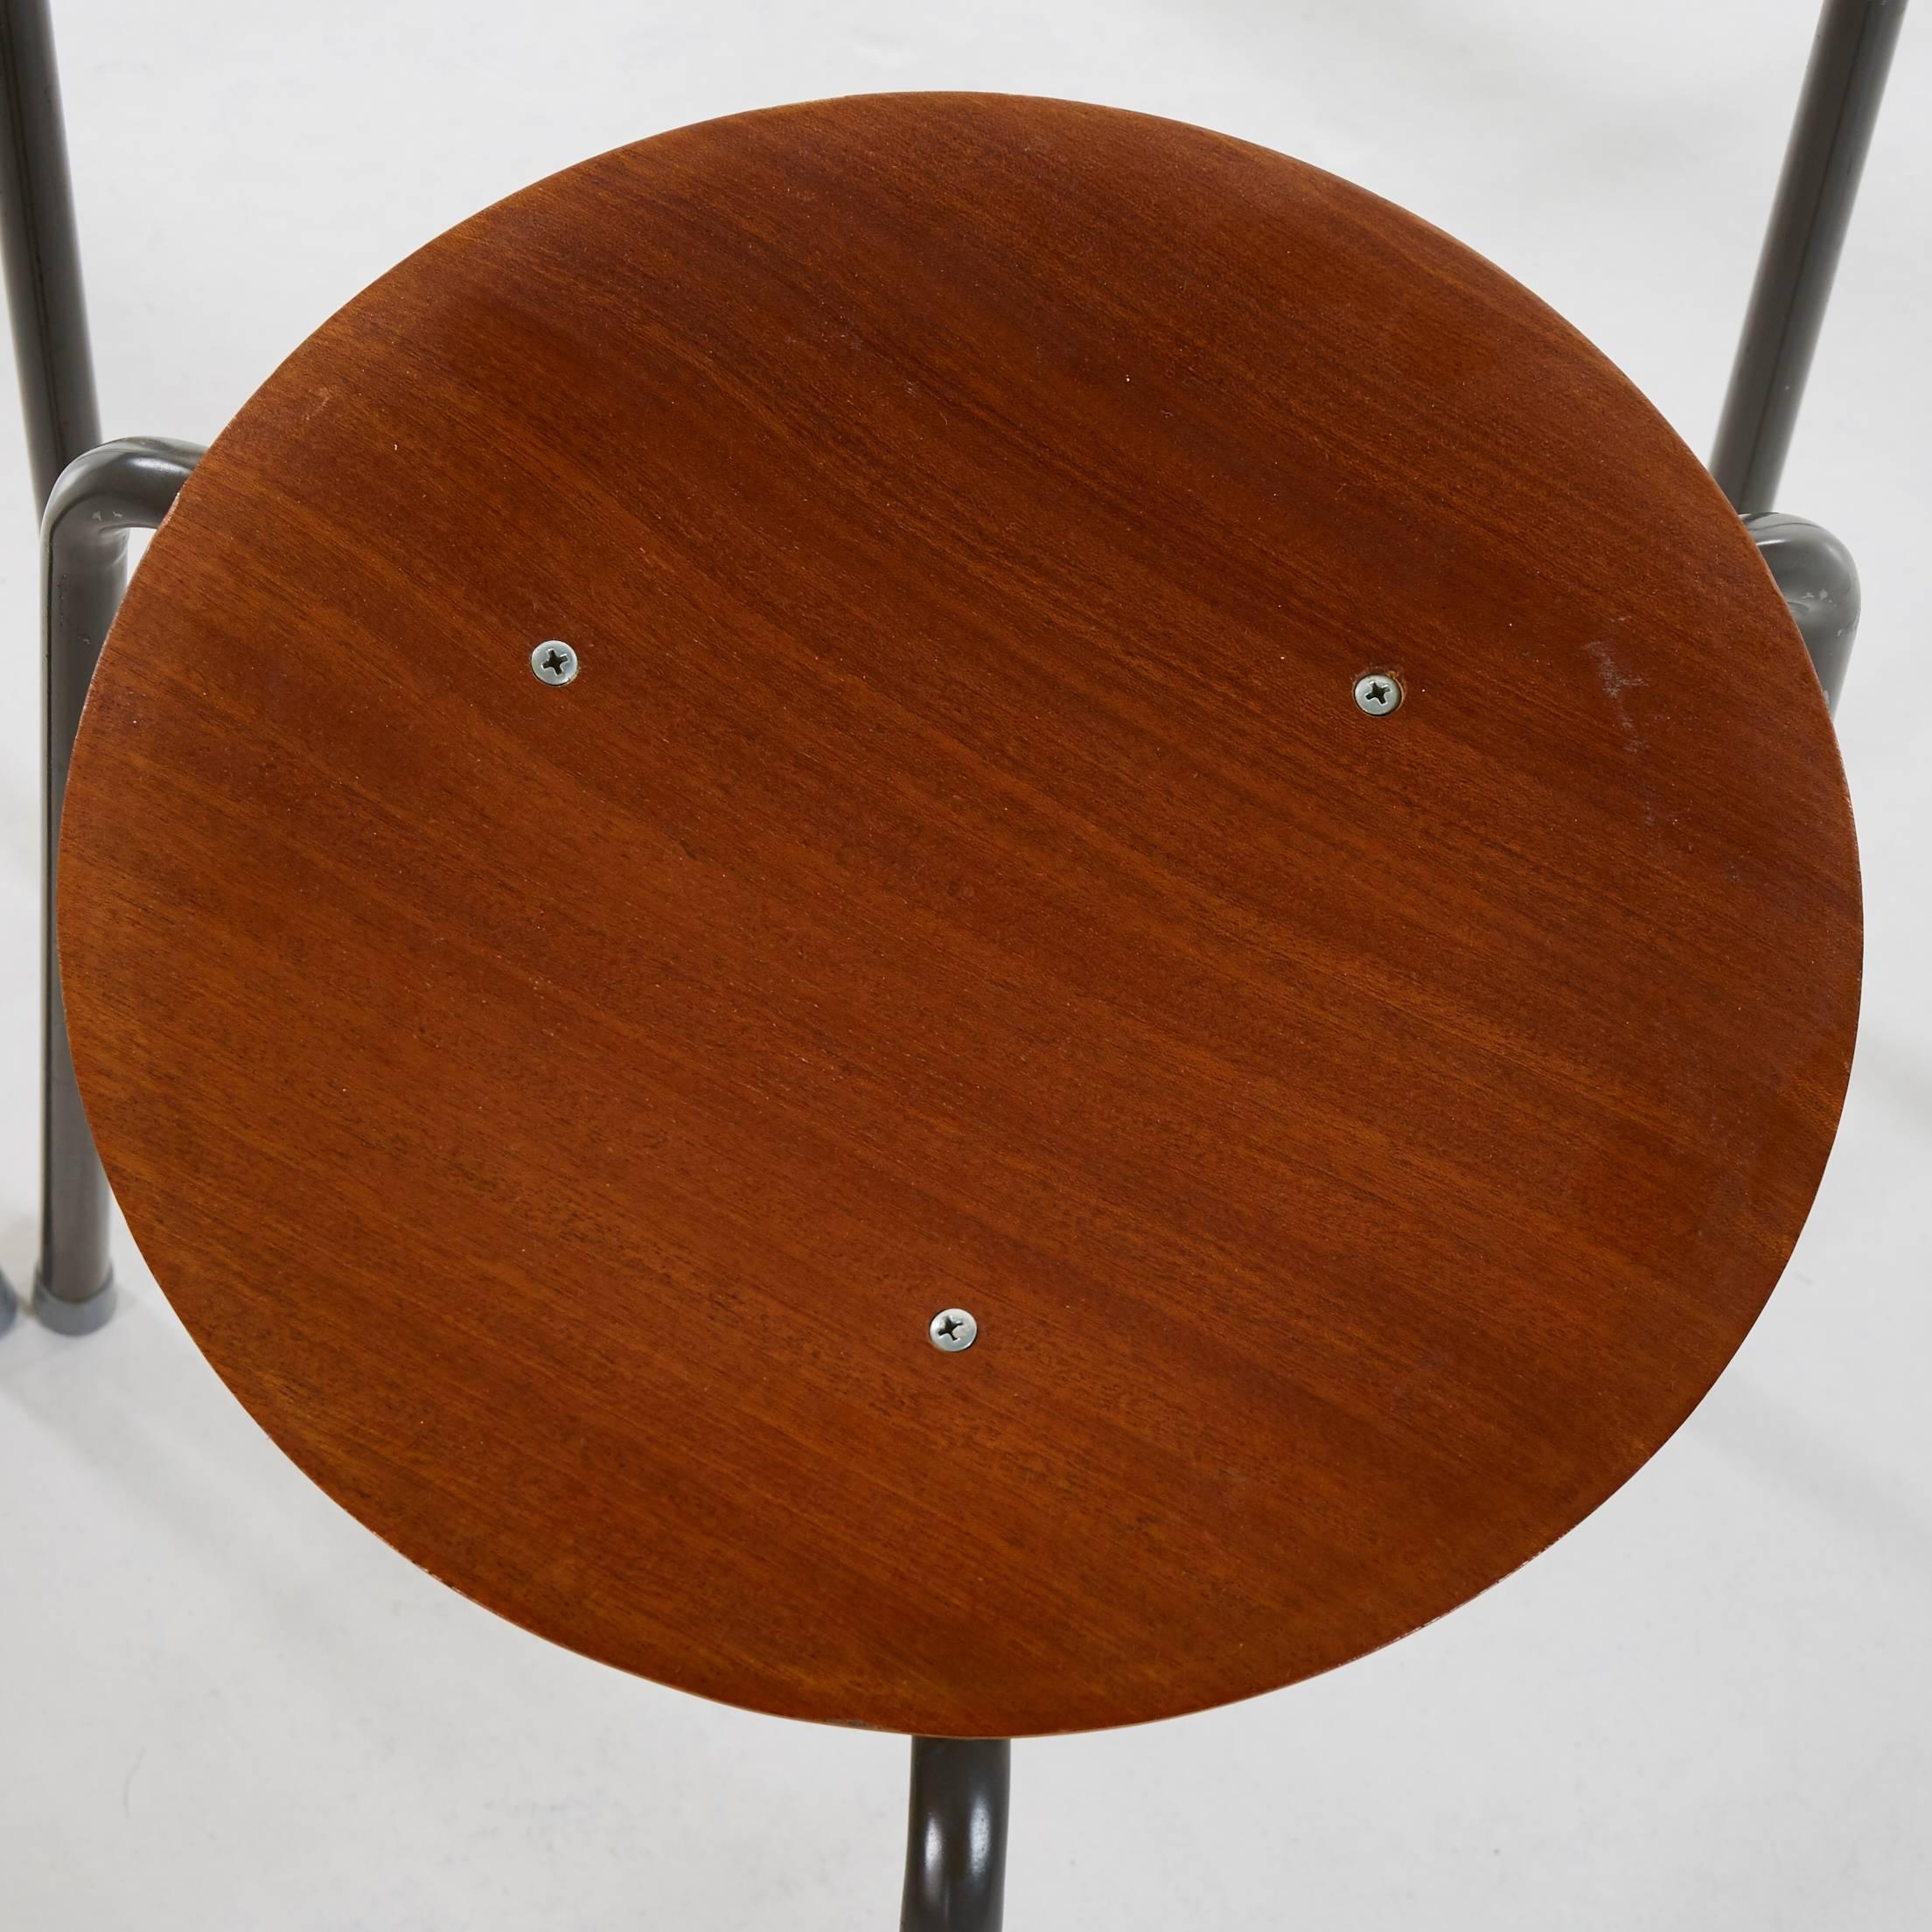 Scandinavian Modern Swedish Modern, Architects Stools, Mahogany, 1950s attributed to Arne Jacobsen For Sale